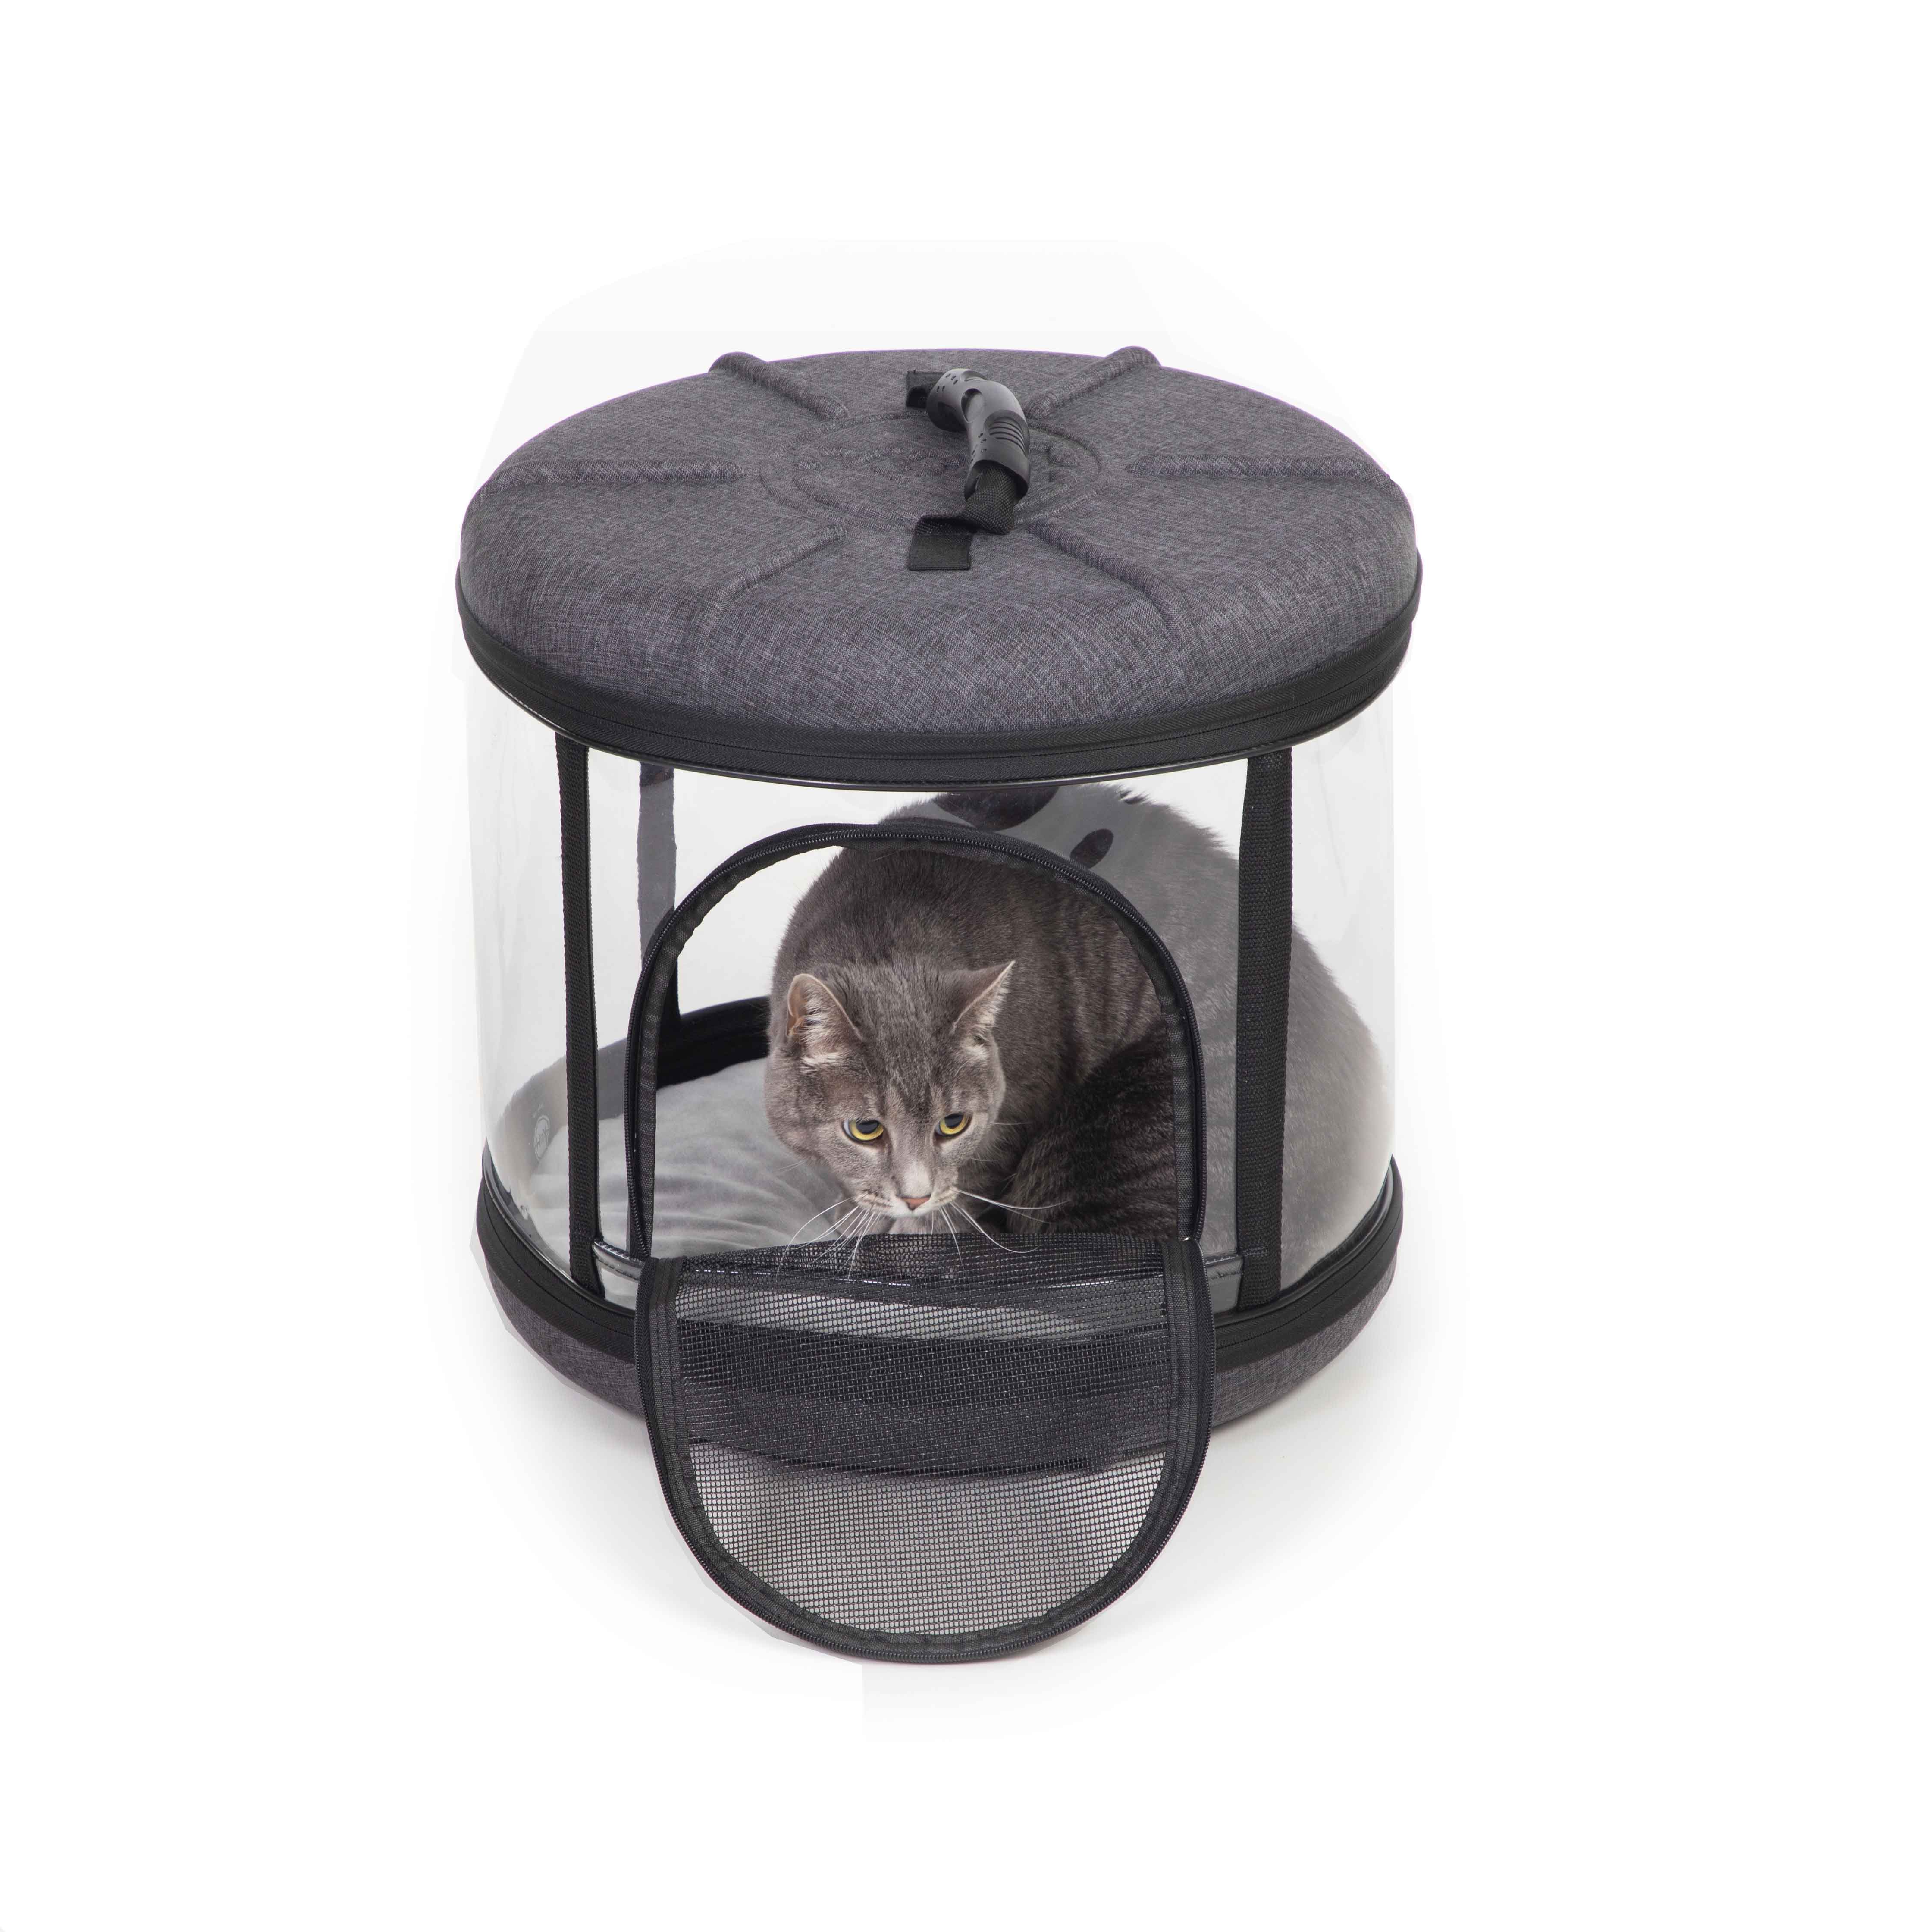 kh100550184 Mod Capsule Soft-Sided Pet Carrier for Cats